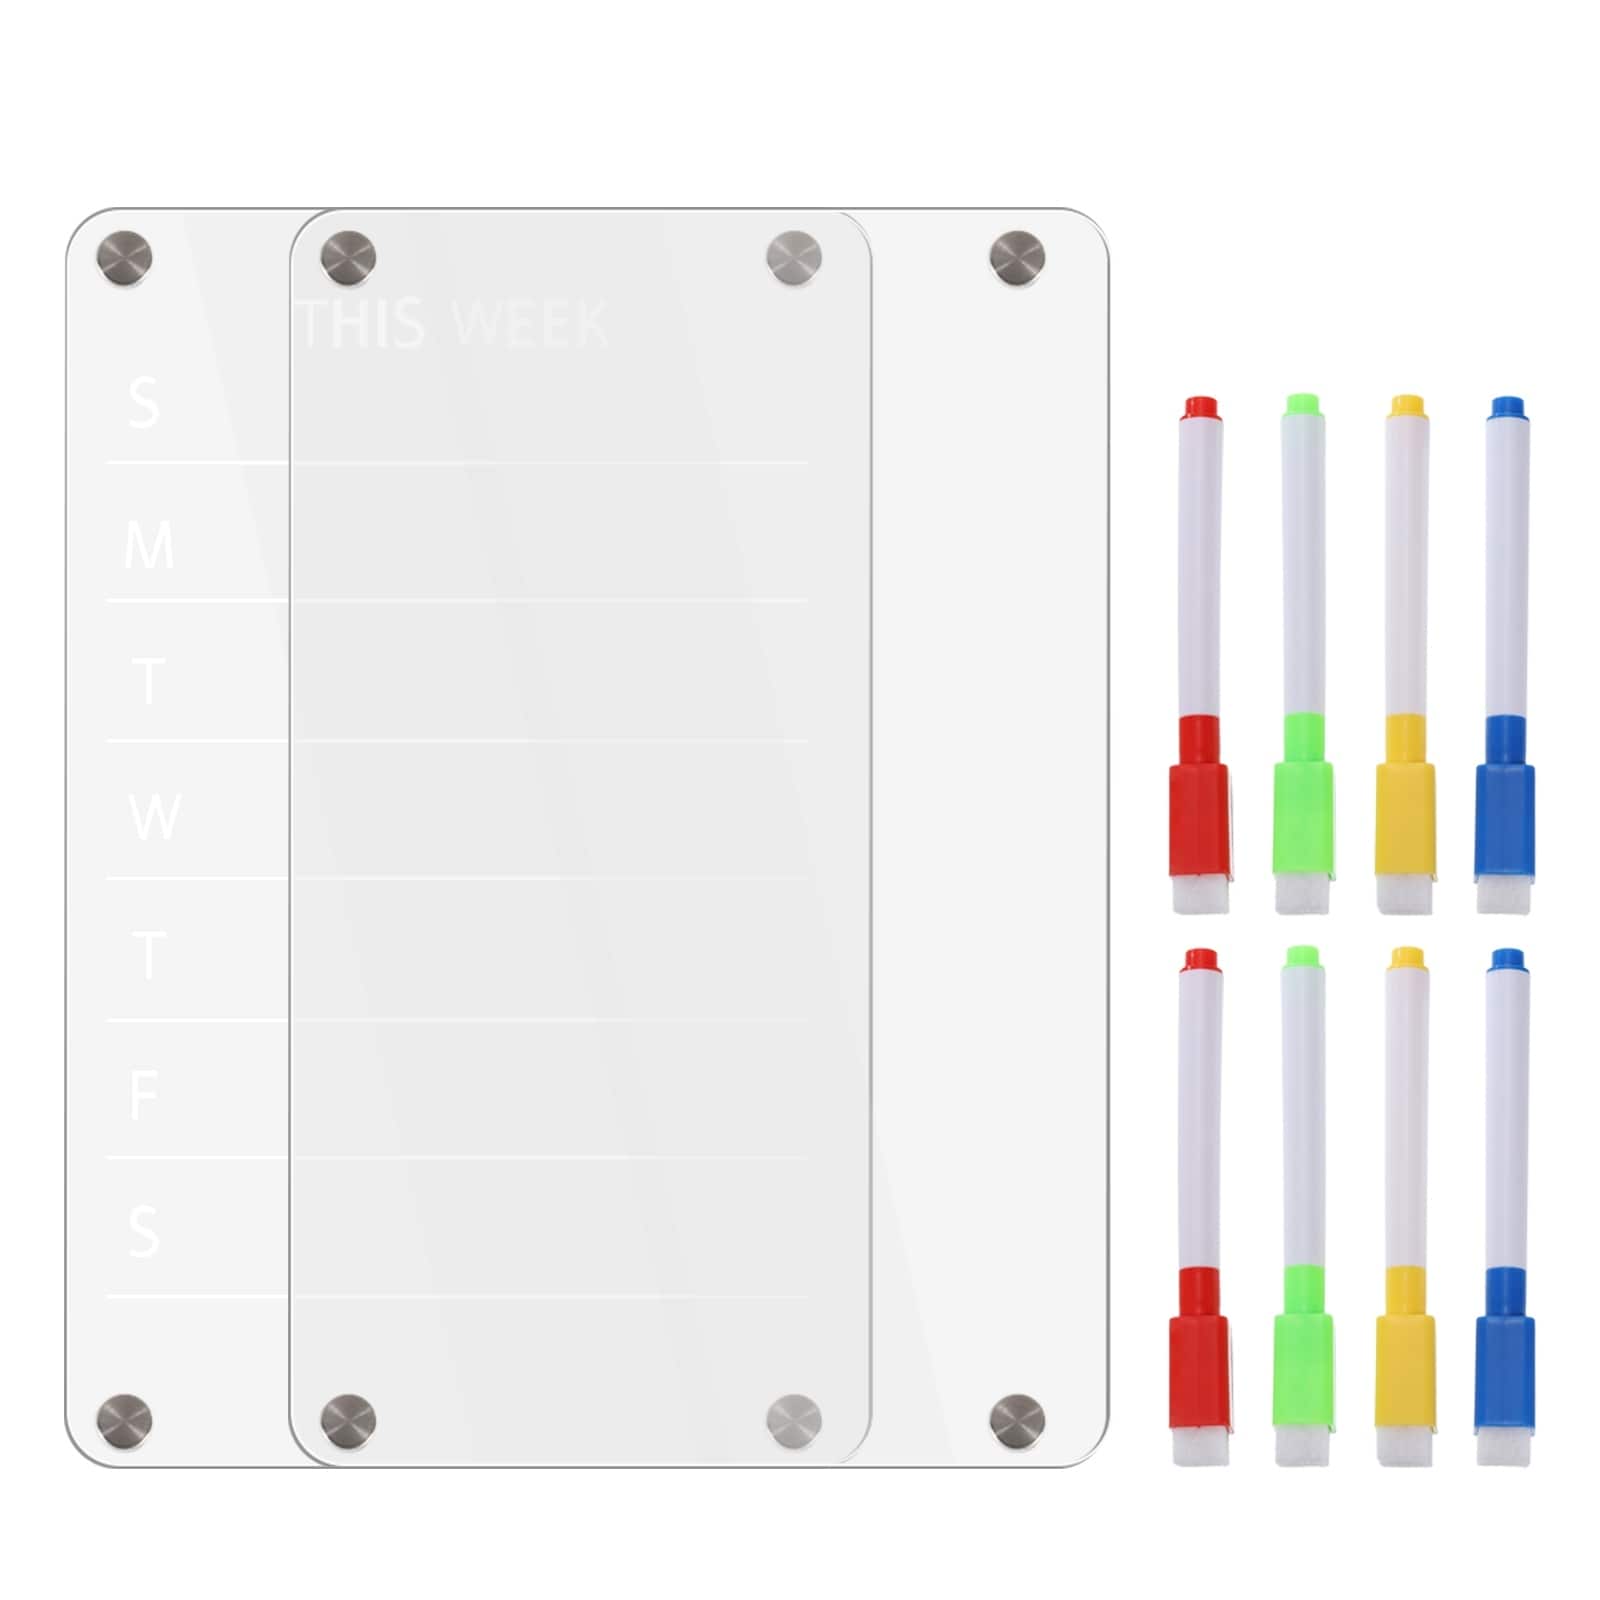 Magnetic Acrylic Monthly and Weekly Calendar for Fridge Black Dry Erase  Acrylic Refrigerator Calendar Planning Board Includes 6 Colorful Markers  for